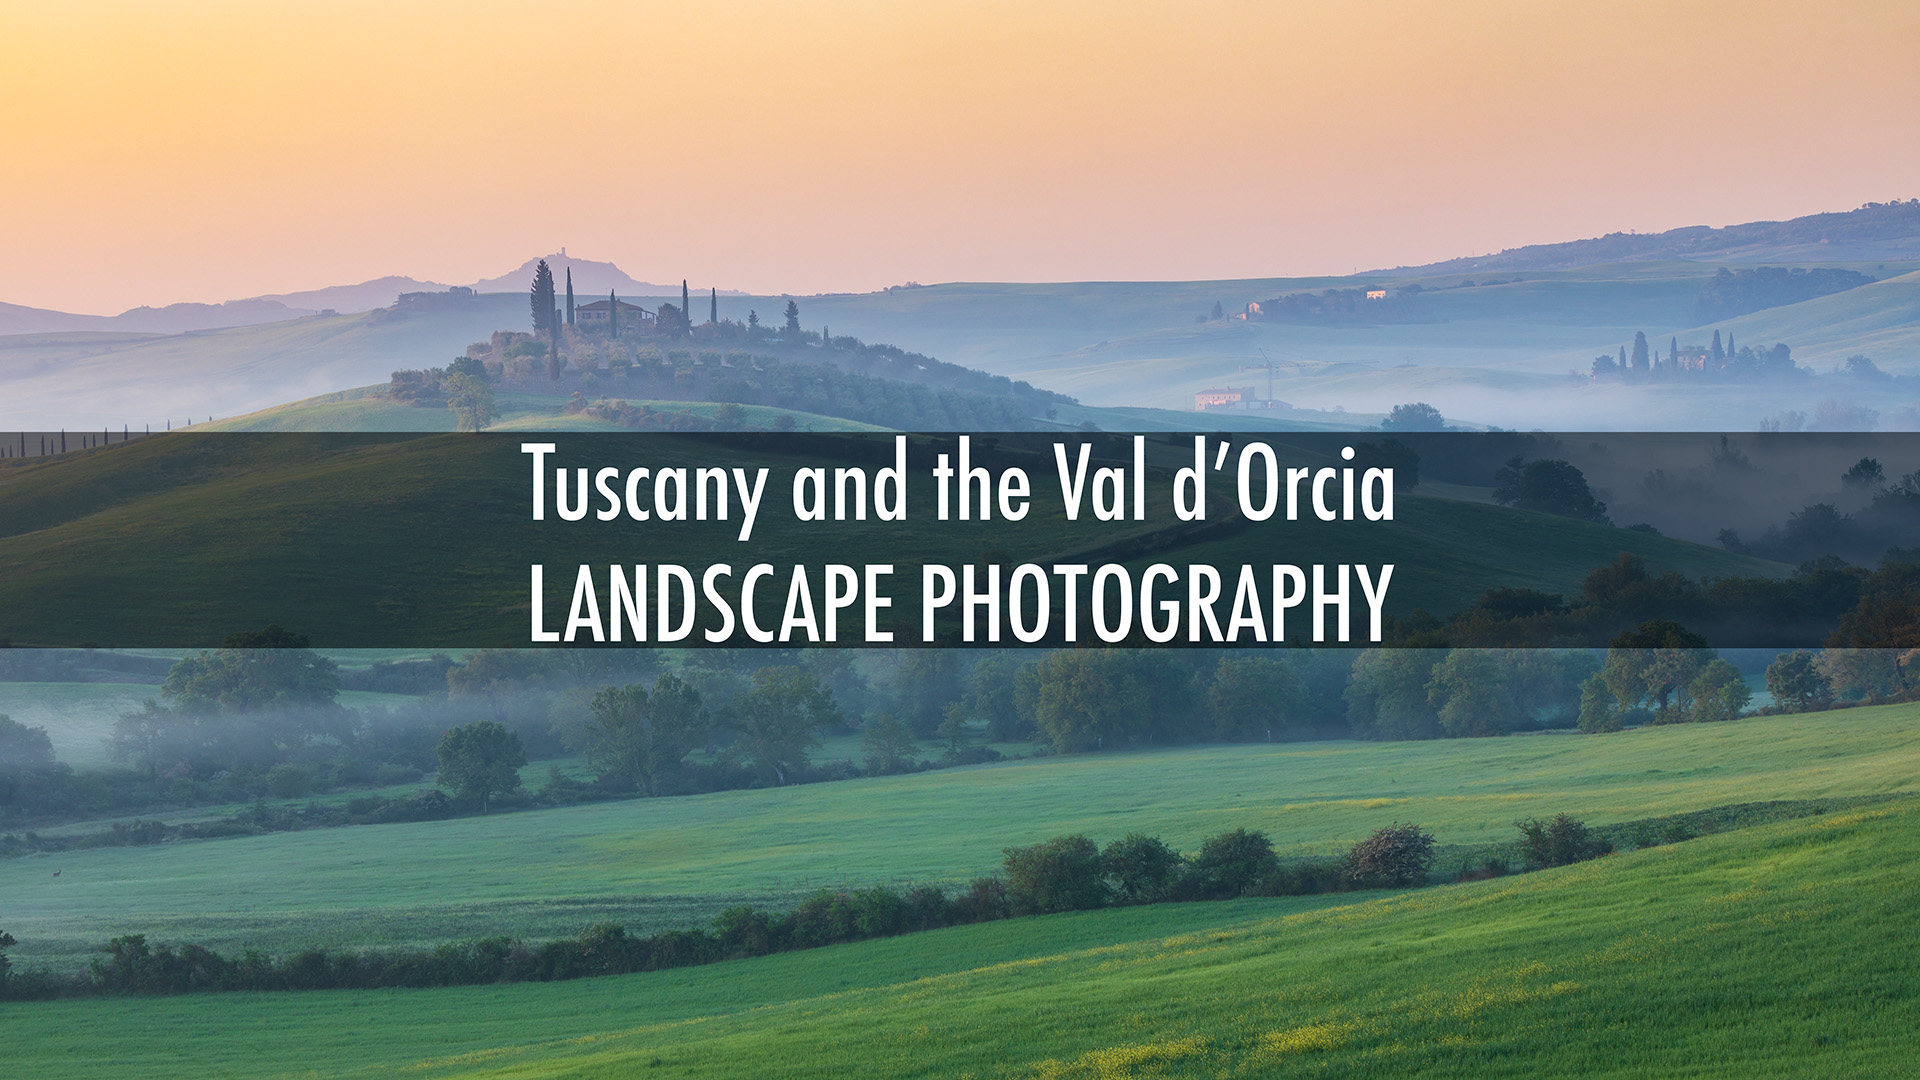 Tuscany and the Val d'Orcia. Landscape photography in Italy.